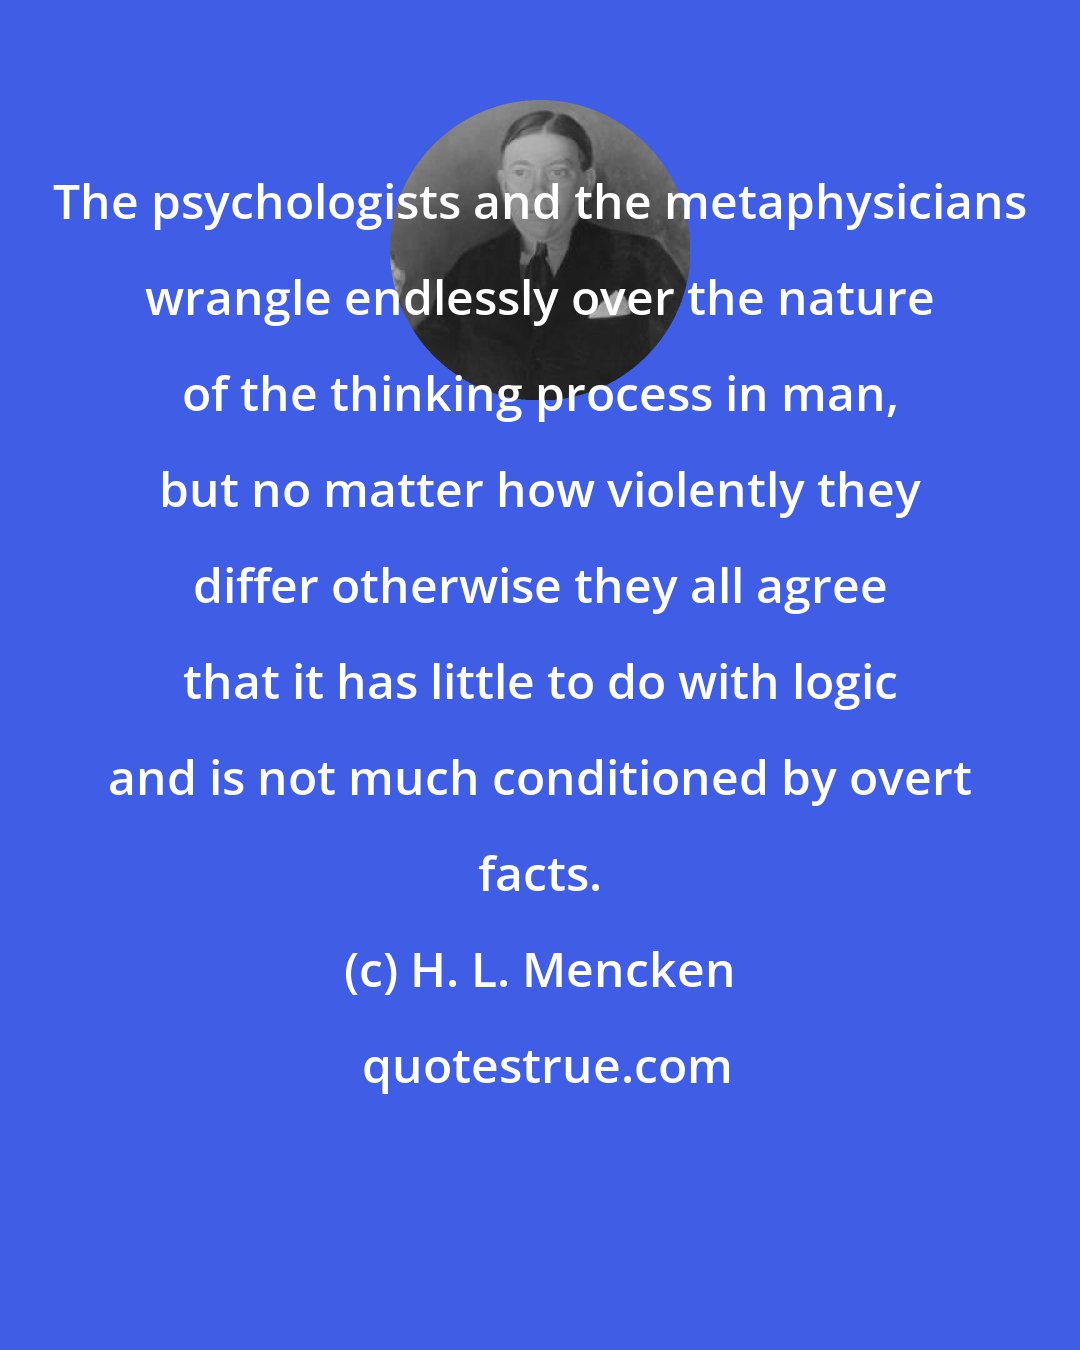 H. L. Mencken: The psychologists and the metaphysicians wrangle endlessly over the nature of the thinking process in man, but no matter how violently they differ otherwise they all agree that it has little to do with logic and is not much conditioned by overt facts.